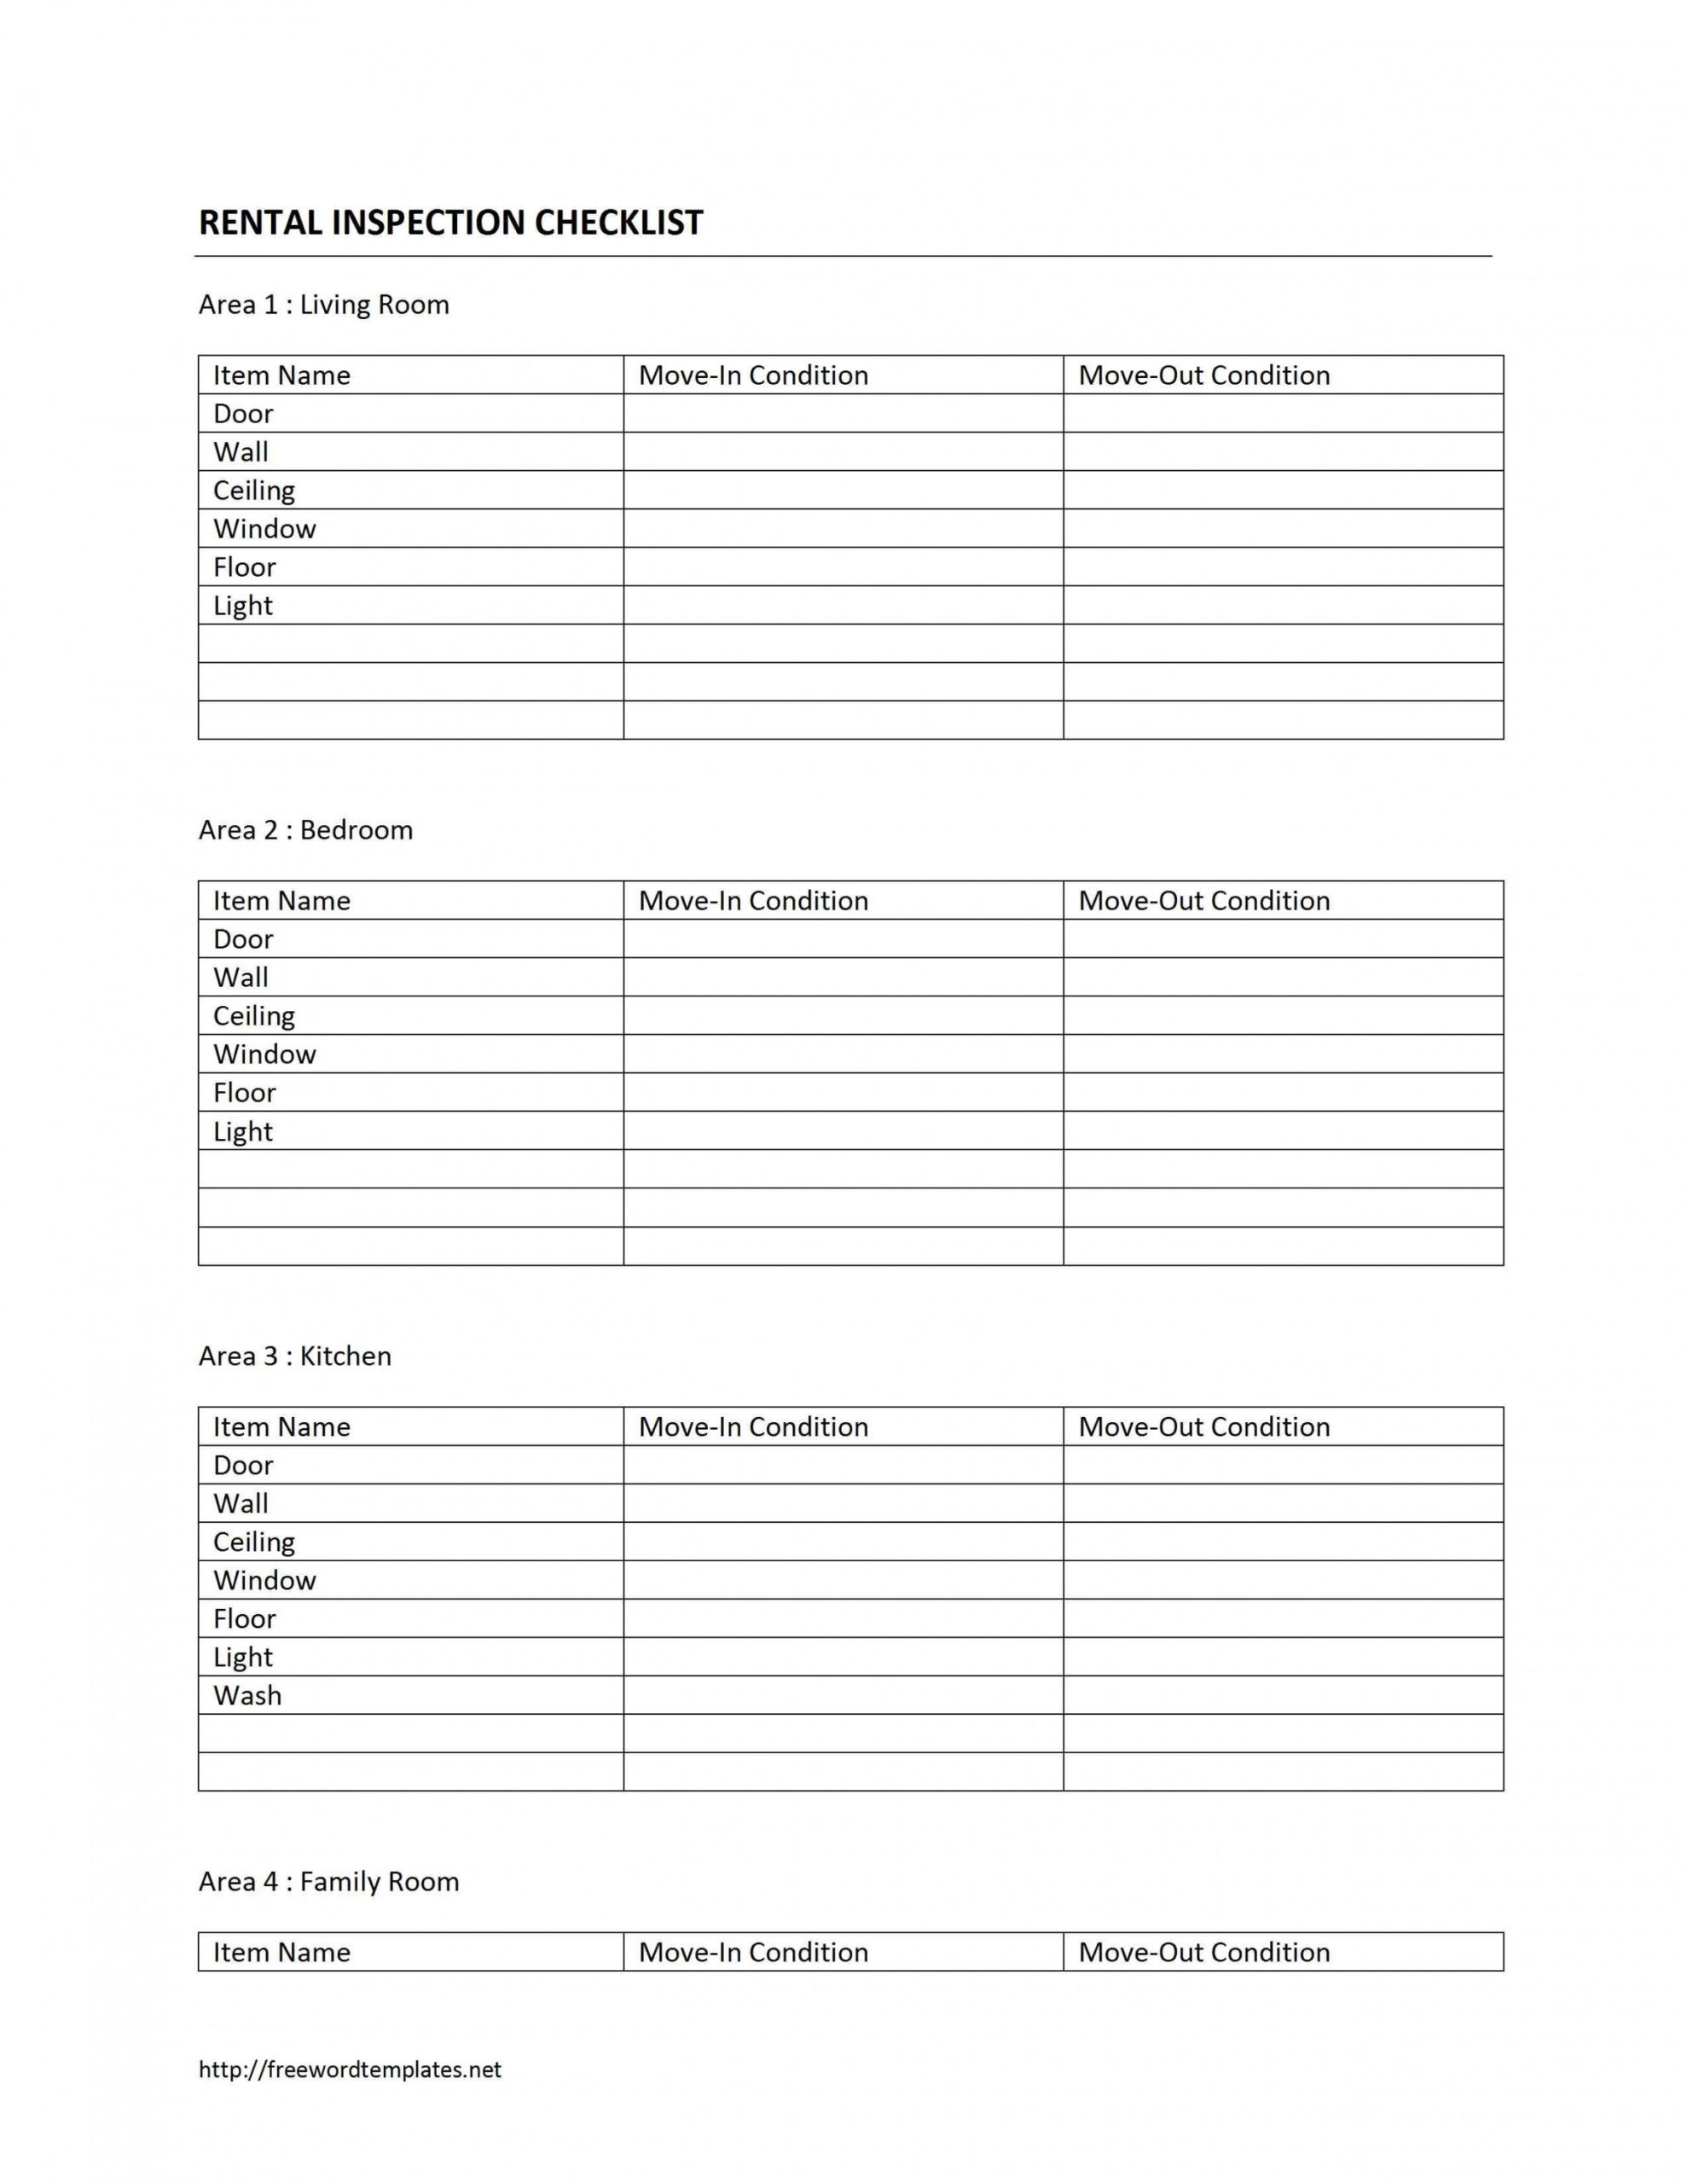 free home rental inspection checklist condition of rental property checklist template examples